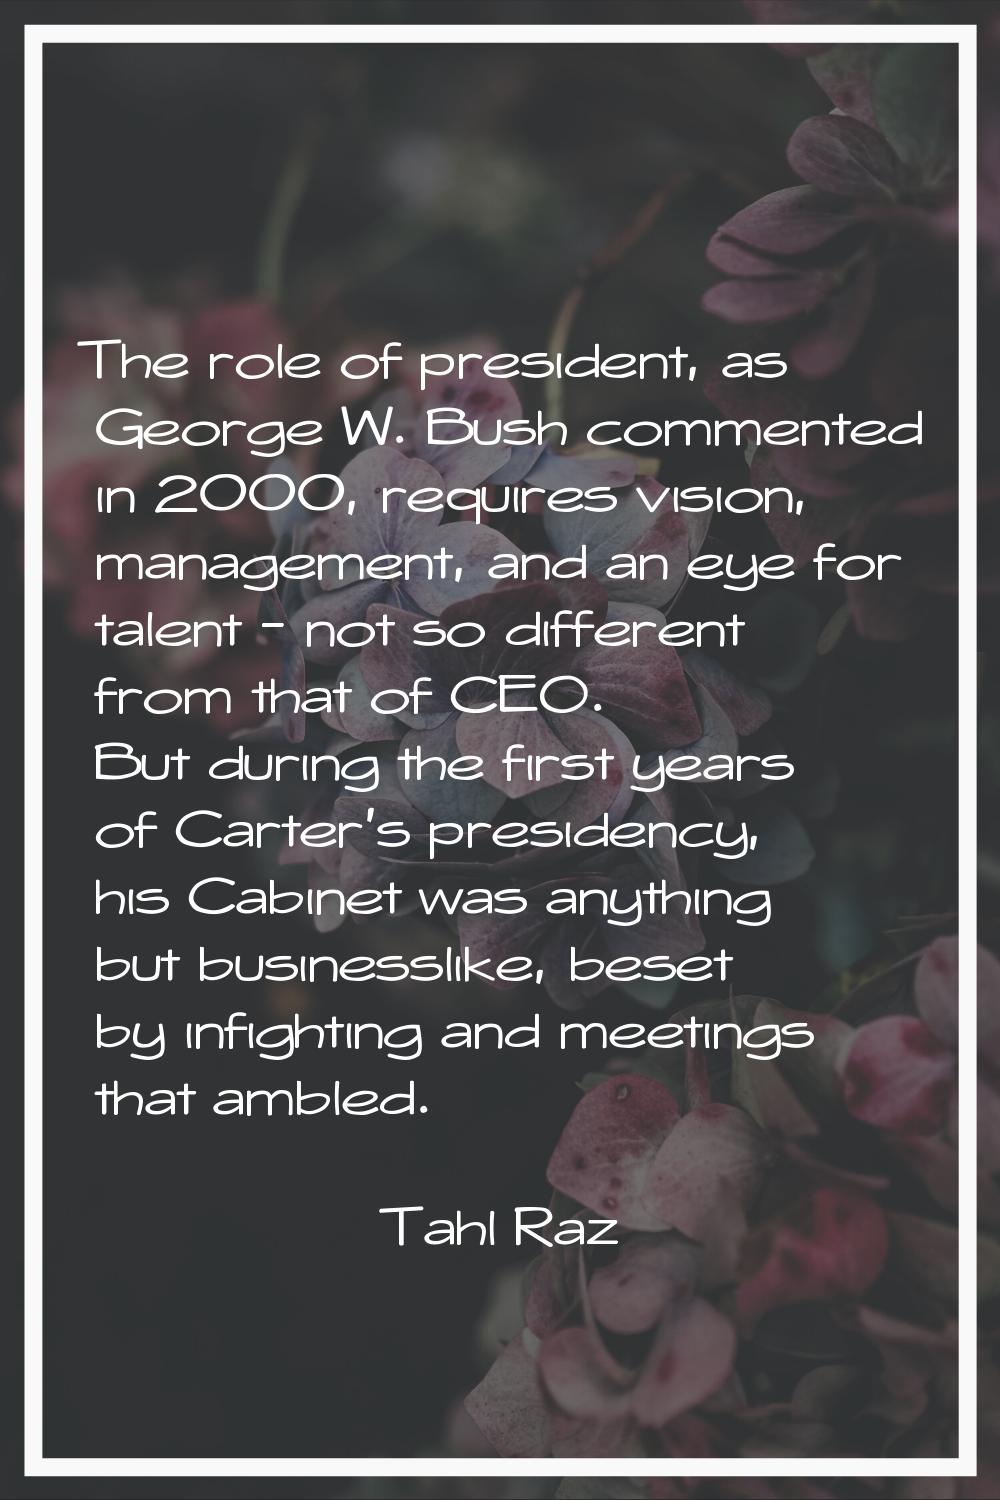 The role of president, as George W. Bush commented in 2000, requires vision, management, and an eye